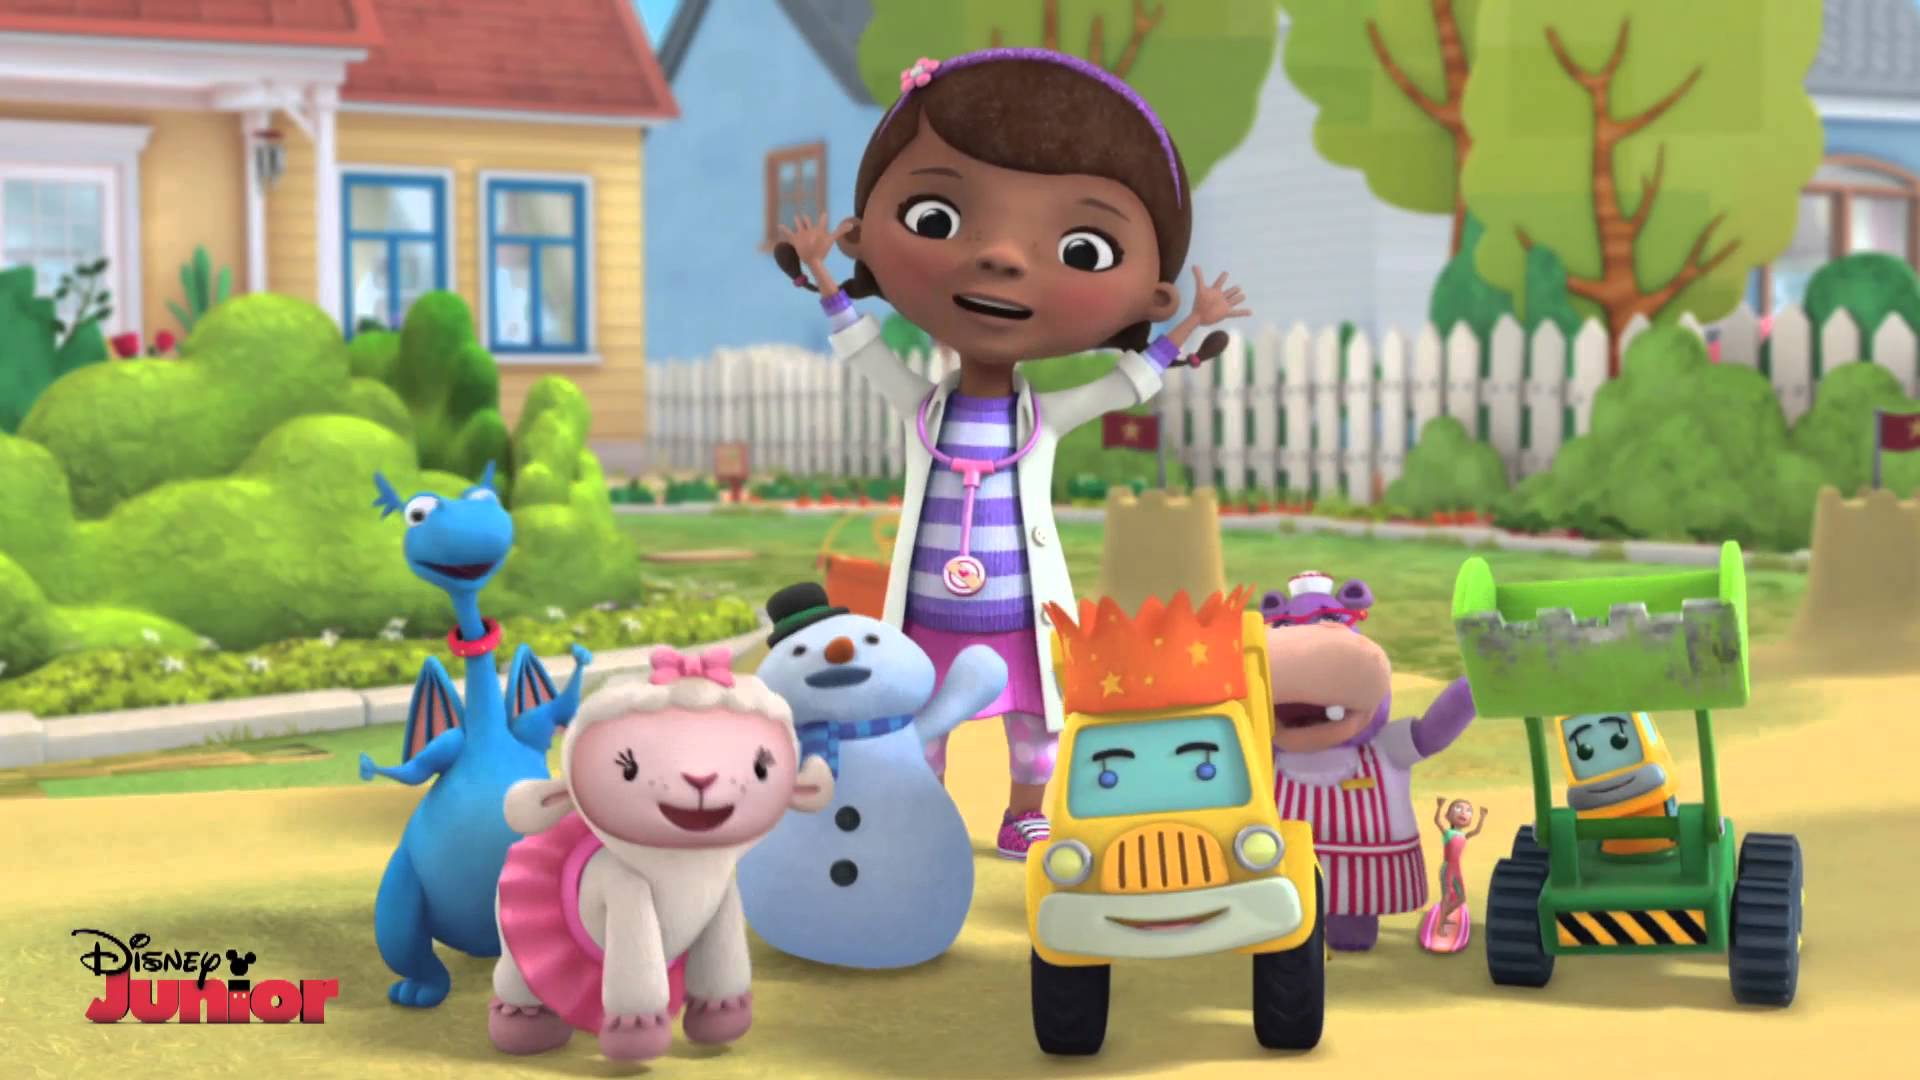 Special Doc McStuffins Episode To Screen at The White House. Disney